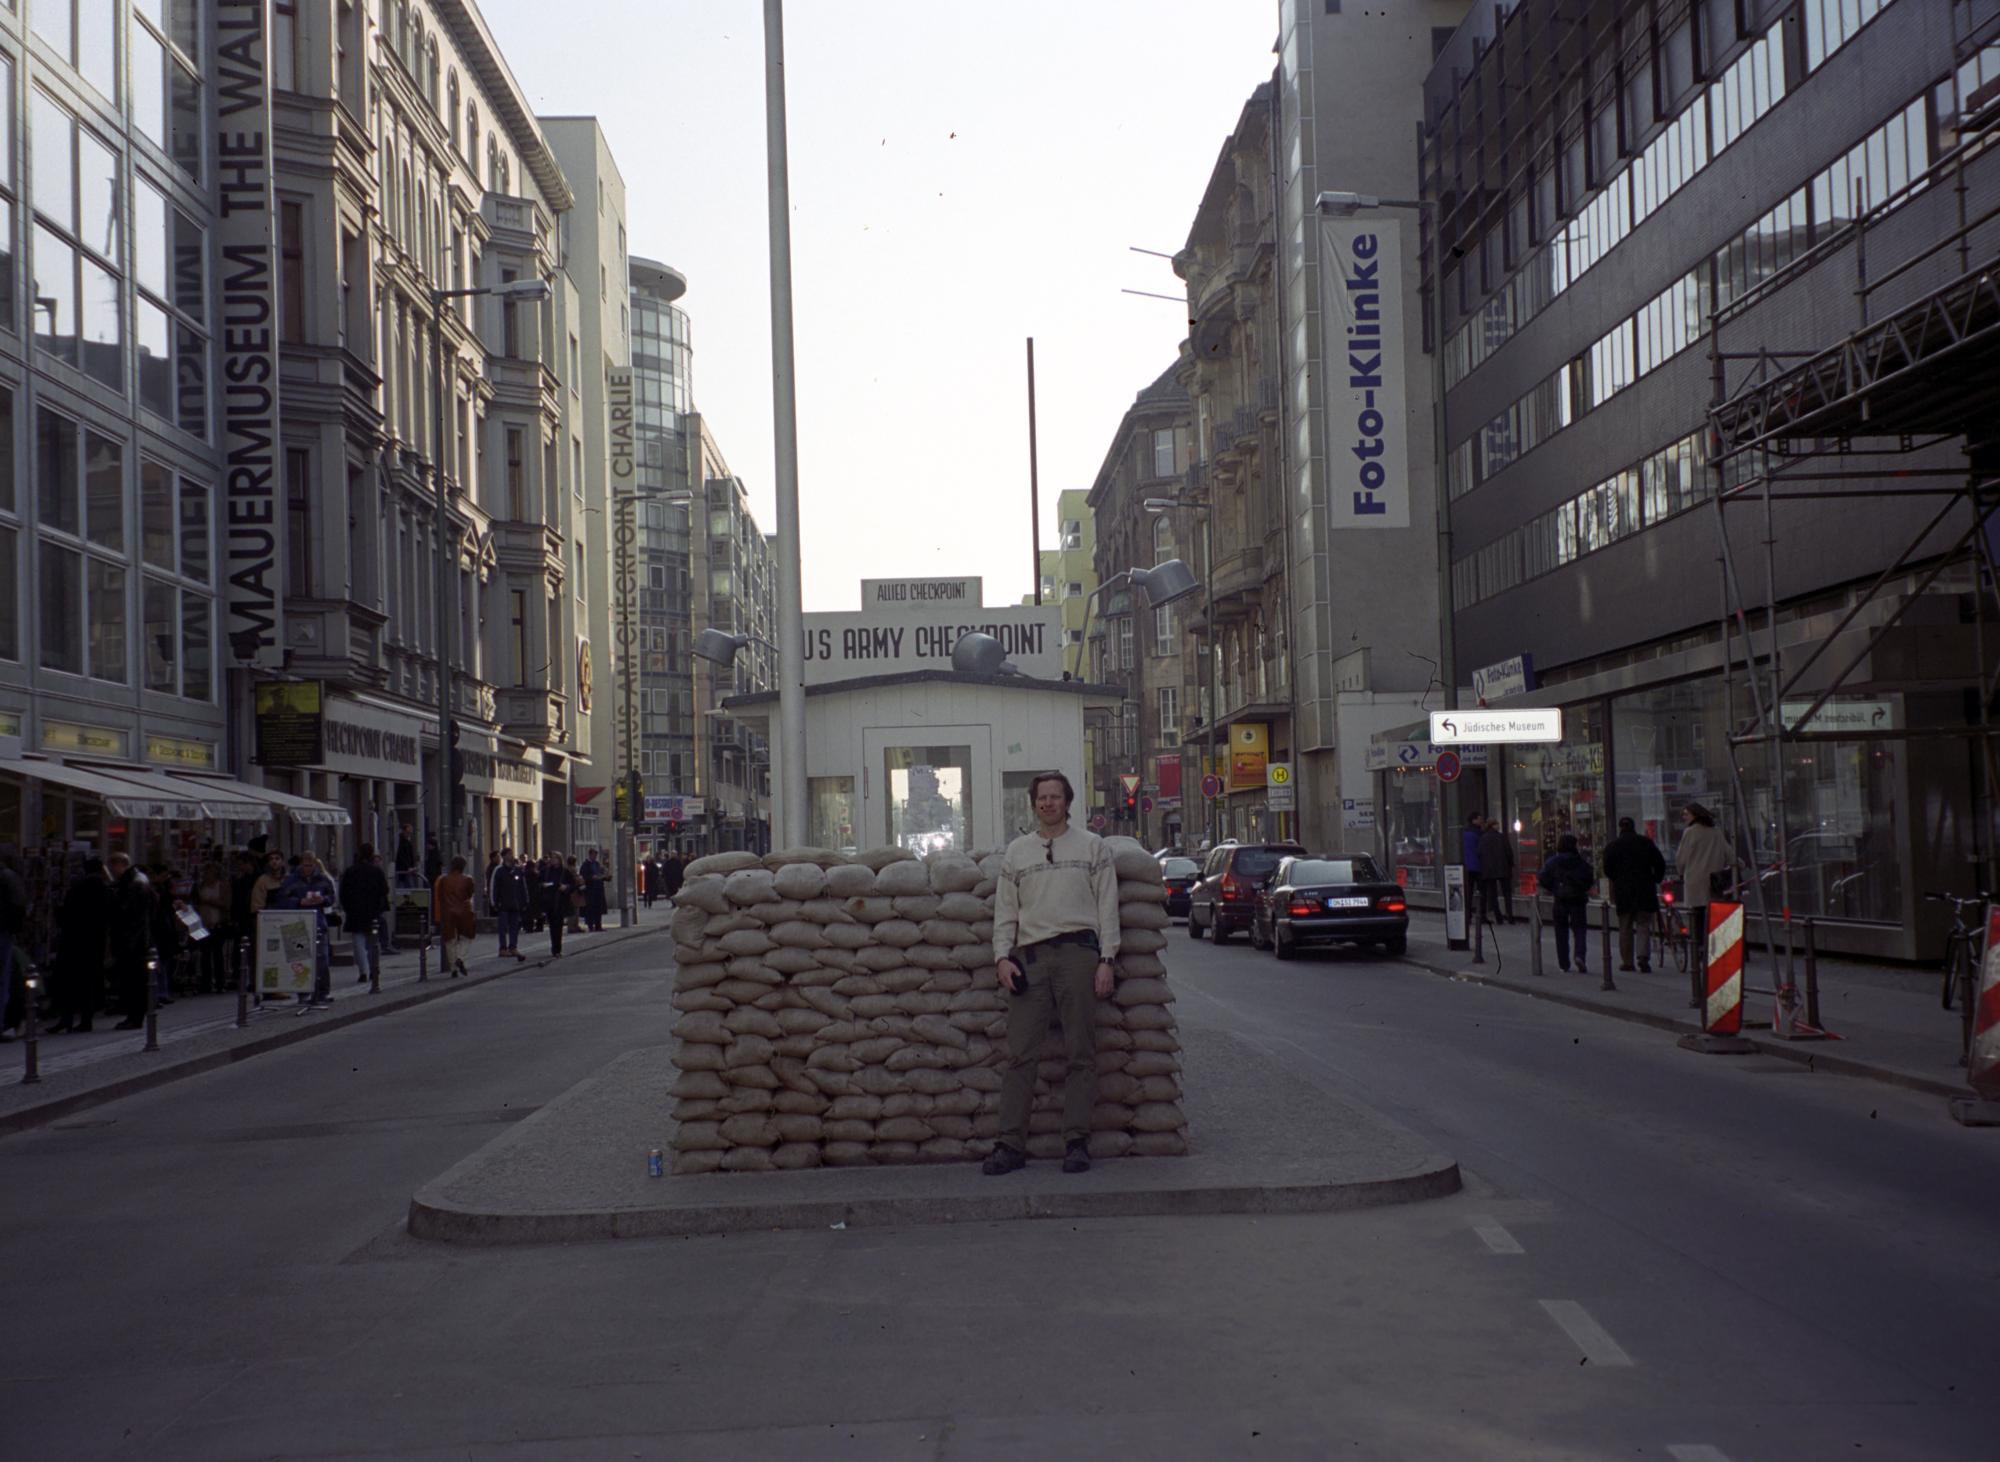 Germany - Checkpoint Charlie